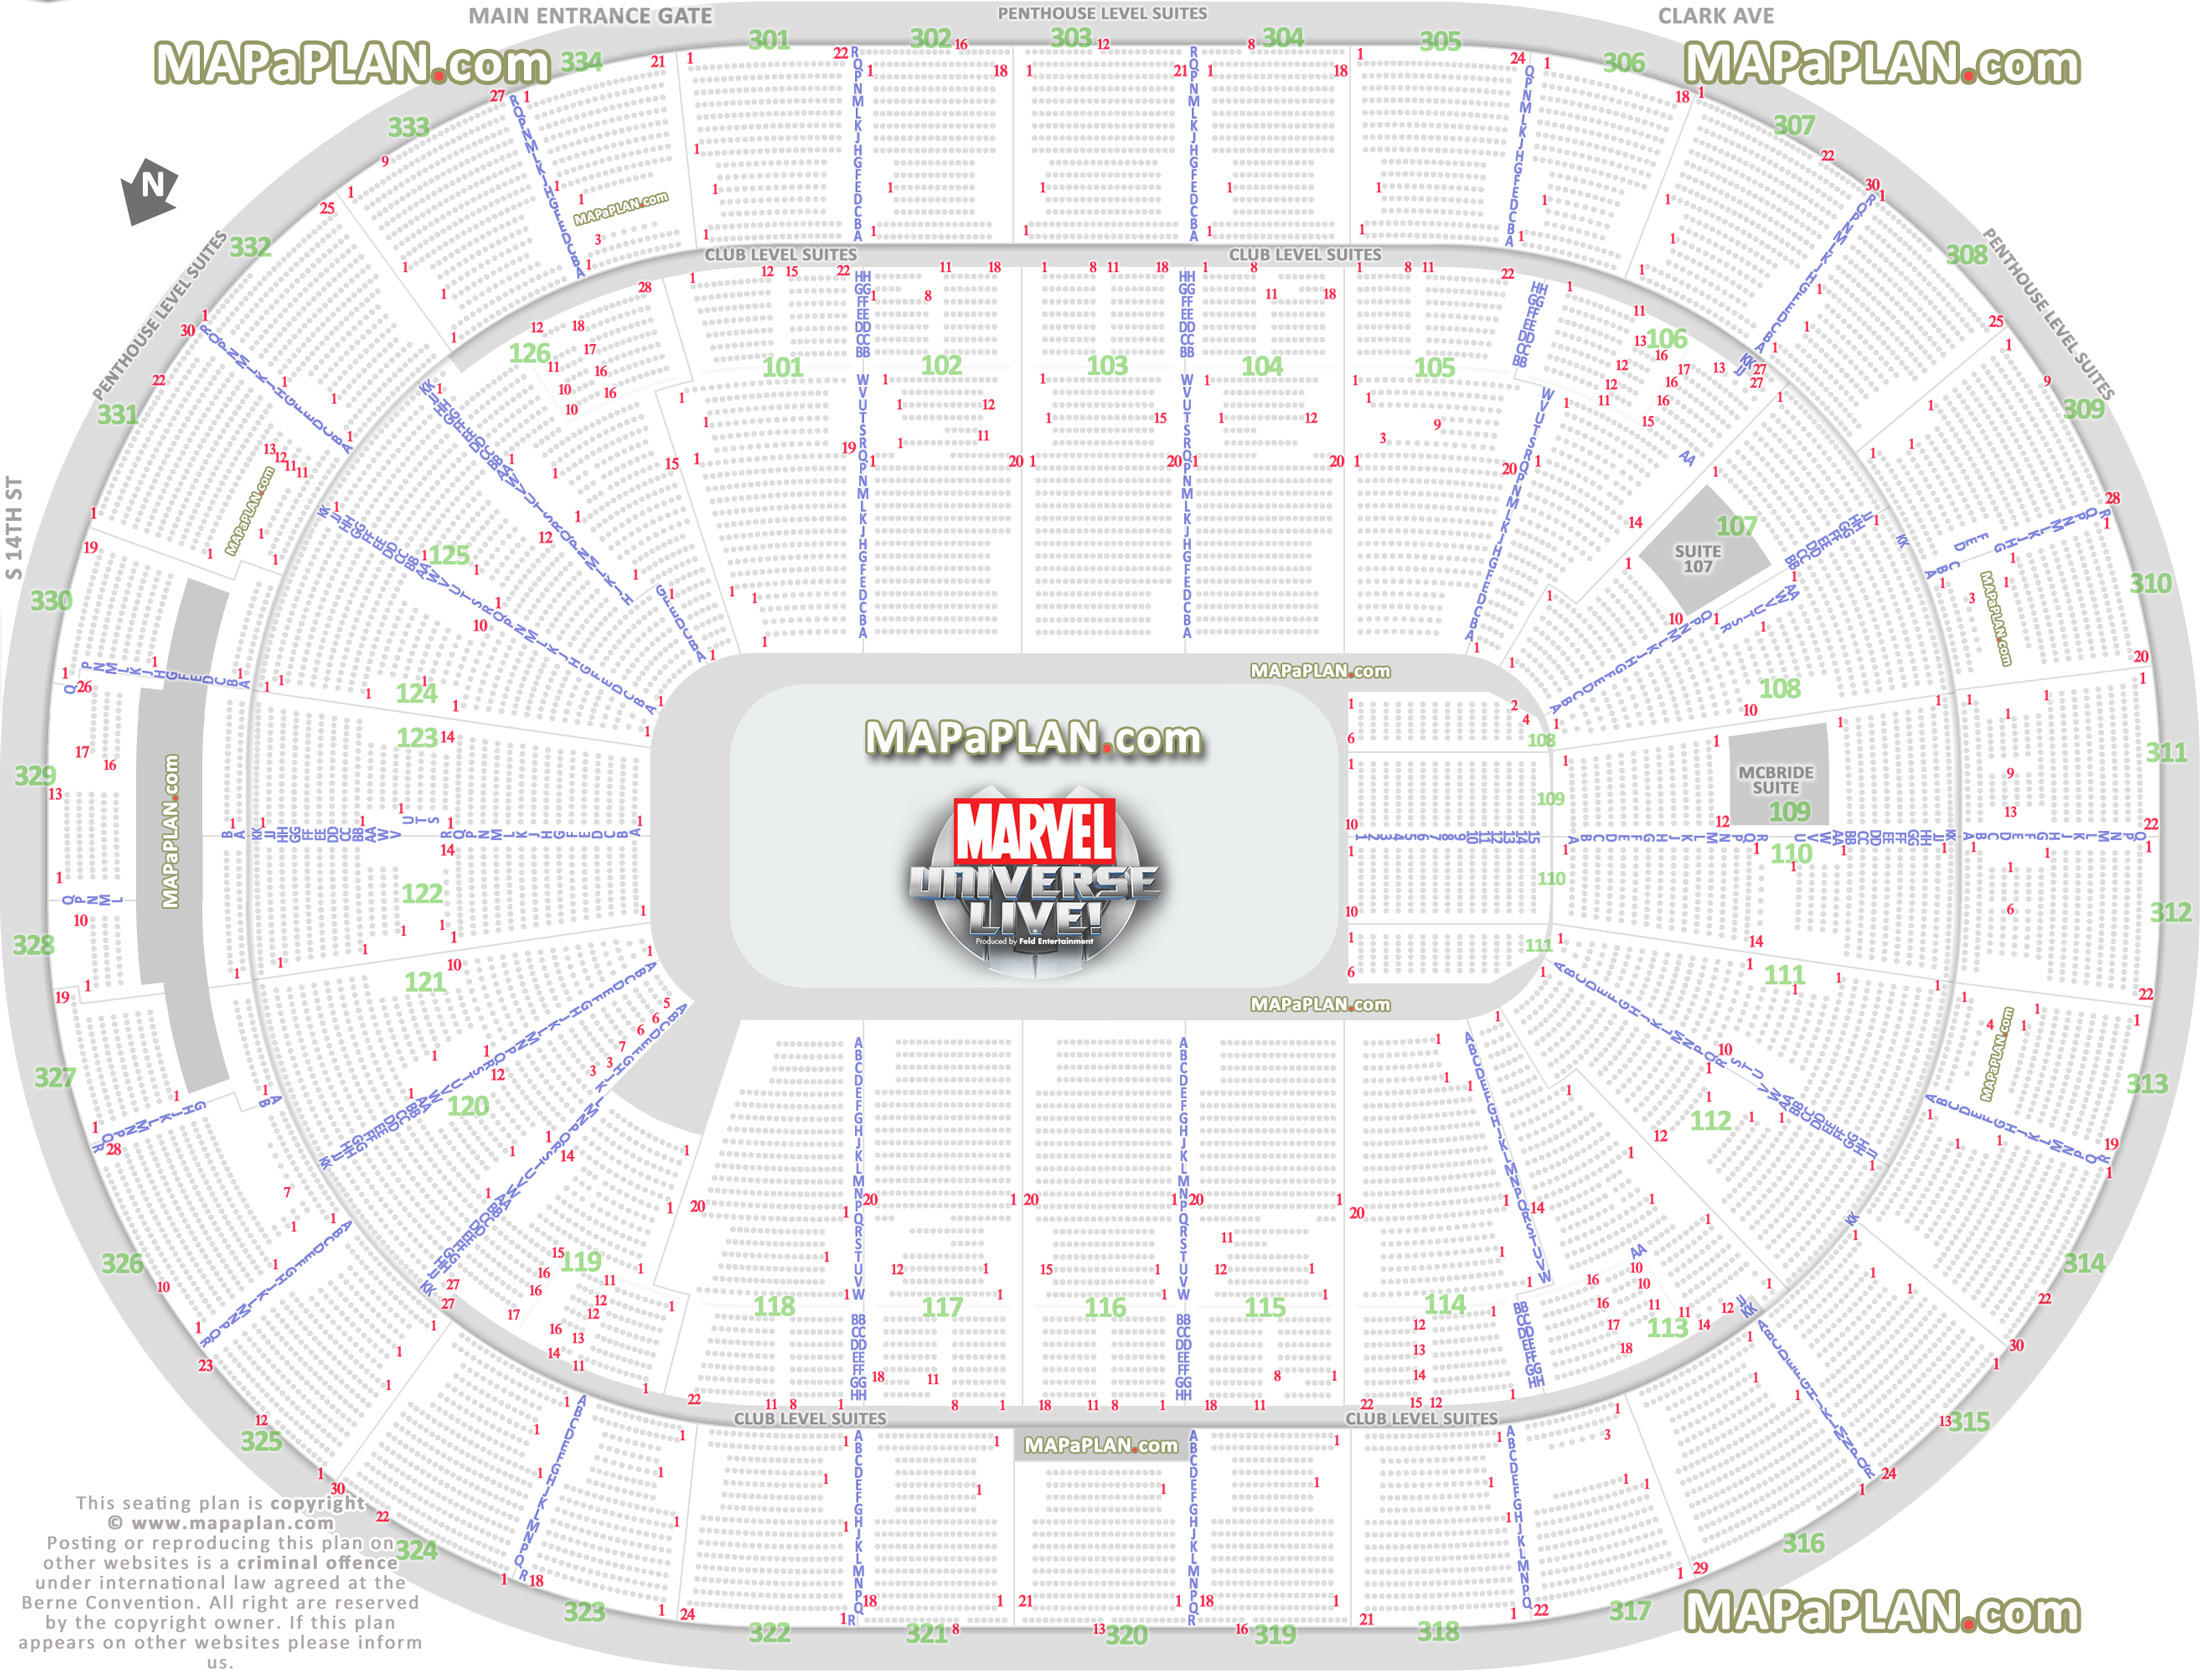 marvel universe live new show interactive balcony best seat selection arrangement review diagram sections 301 302 303 304 305 307 308 309 310 311 312 313 314 315 316 317 318 319 320 321 322 324 326 331 333 334  St. Louis Scottrade Center seating chart